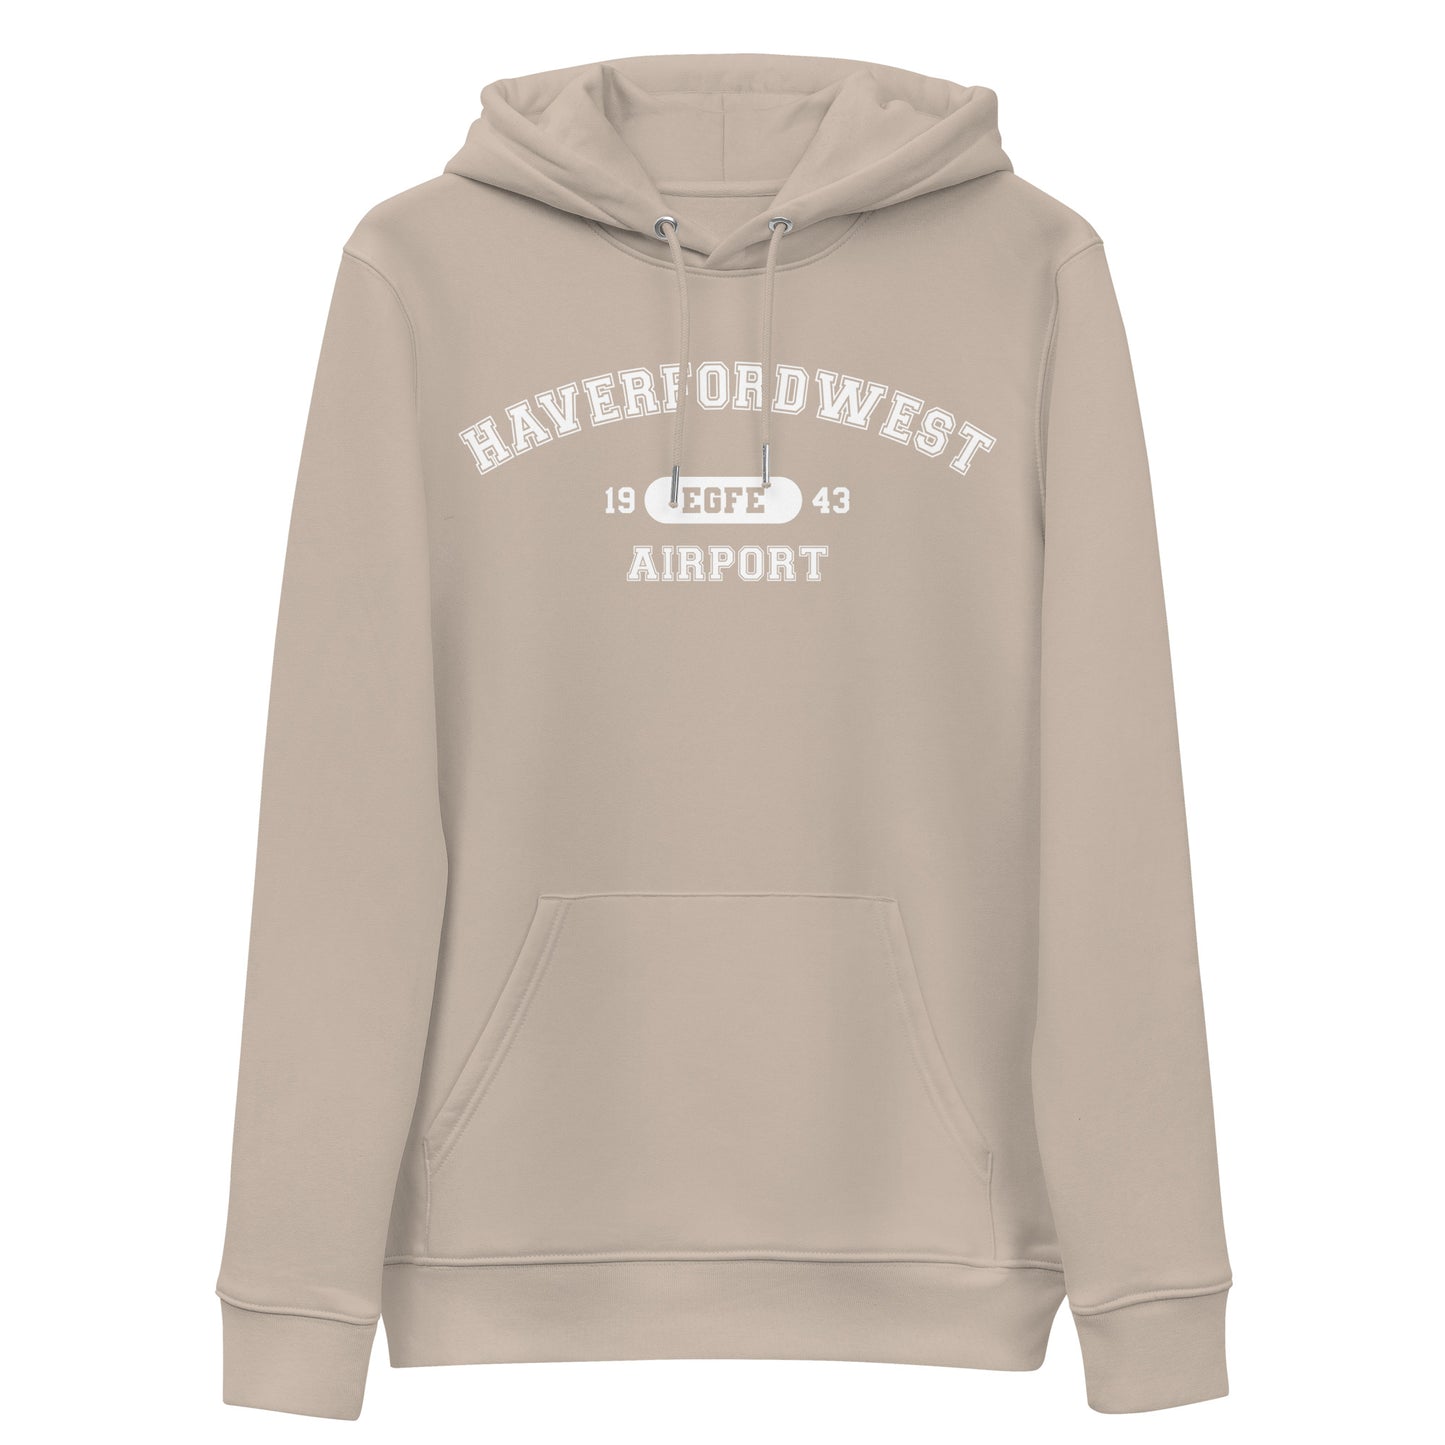 Haverfordwest Airport with ICAO code in collegiate style. Unisex essential eco hoodie.